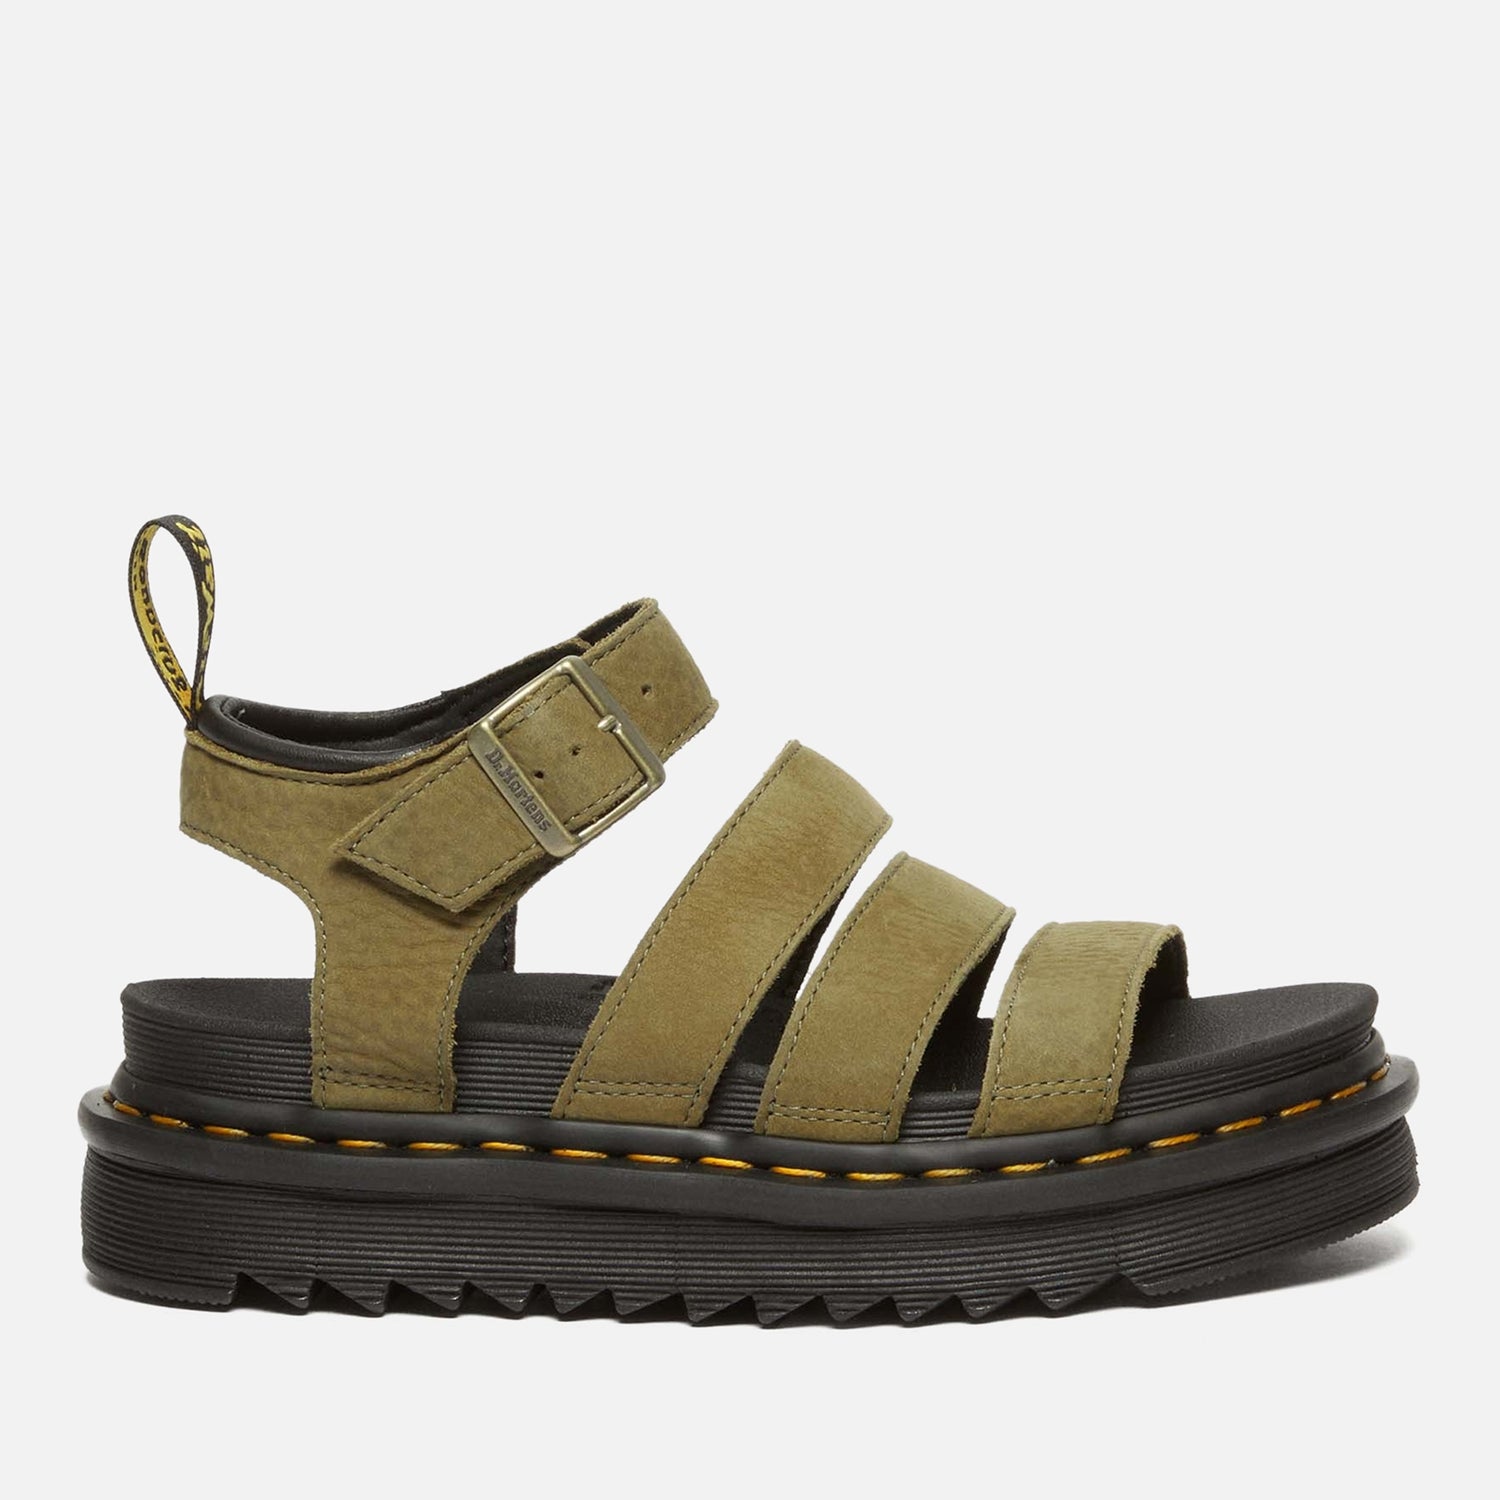 Dr. Martens Women's Blaire Leather Strappy Sandals - UK 3